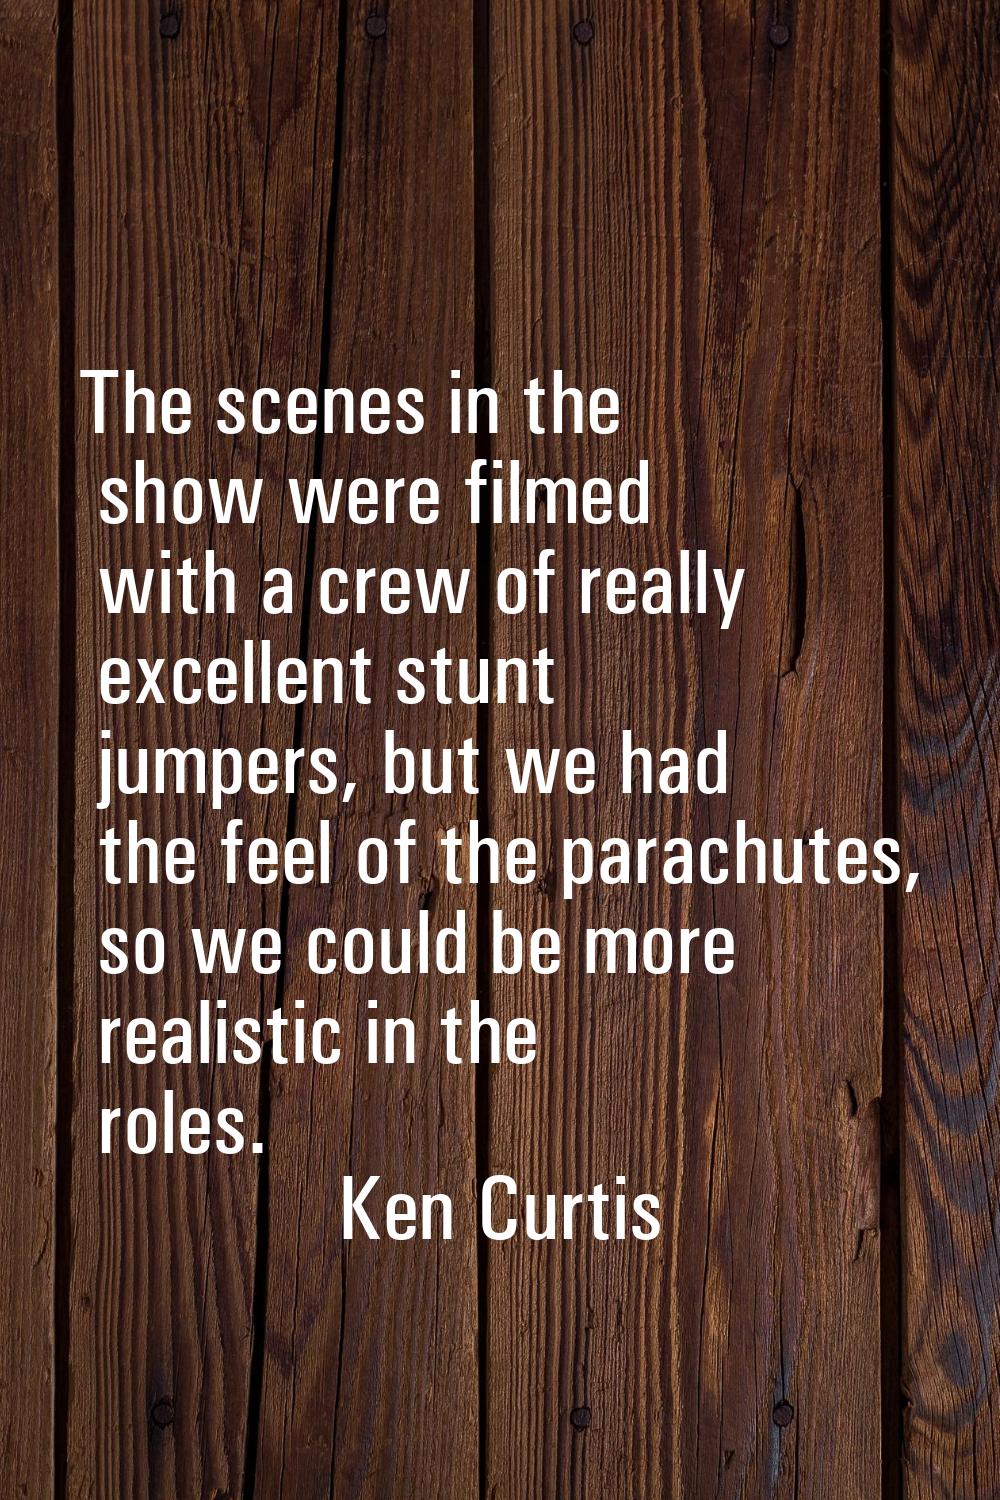 The scenes in the show were filmed with a crew of really excellent stunt jumpers, but we had the fe